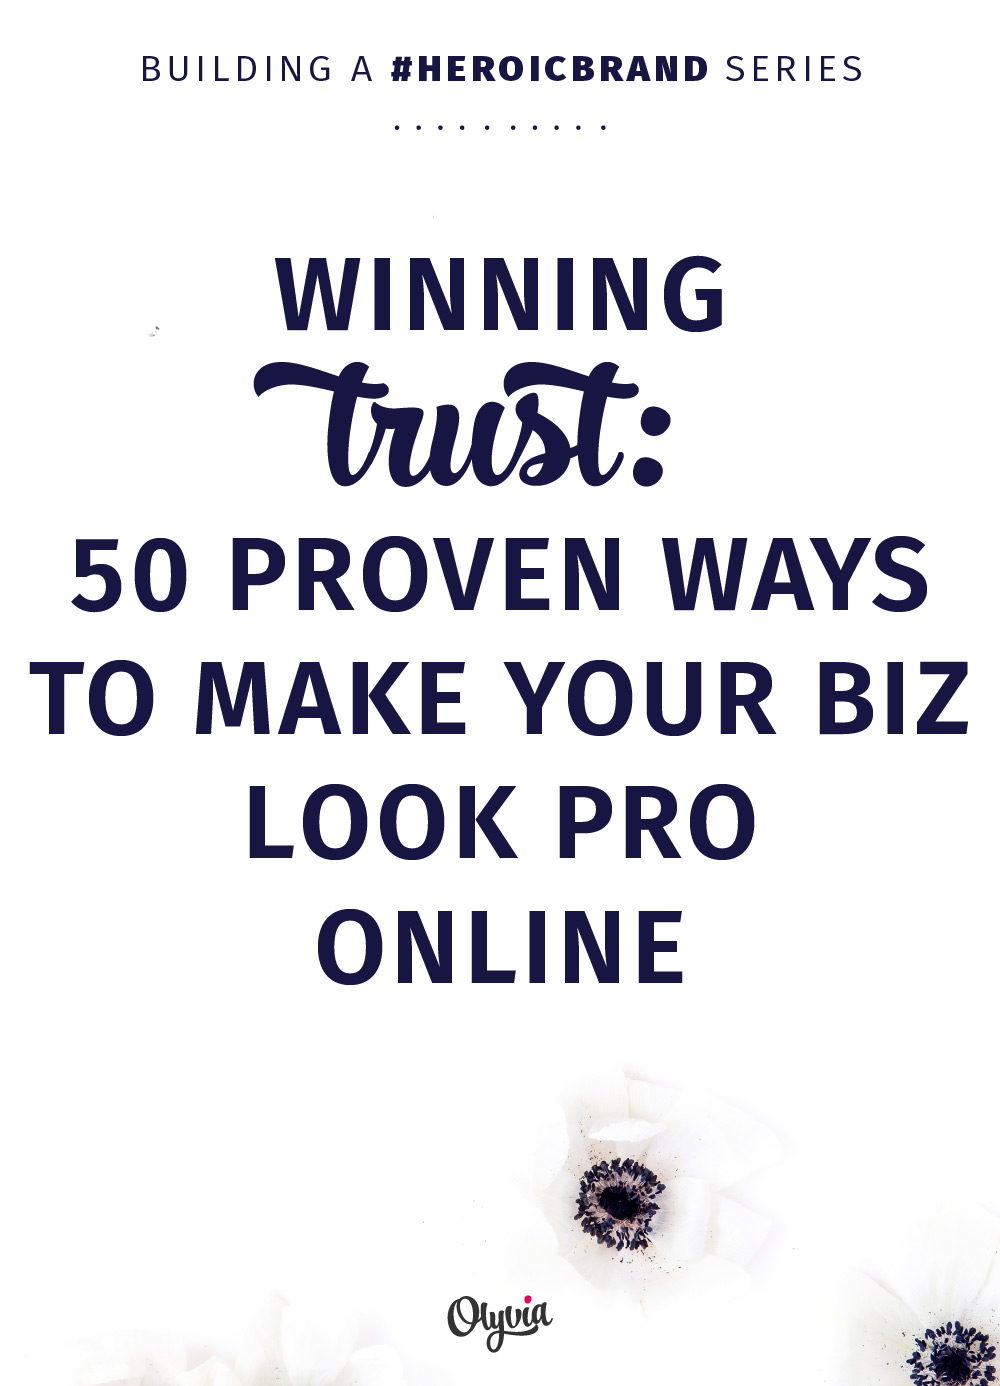 Use this heroic list of 50 proven ways to make your business look professional online to boost your brand cred and be more successful. The tips here will help you be a trusted, respected authority online, meaning you get the followers you want and the clients + customers you need.